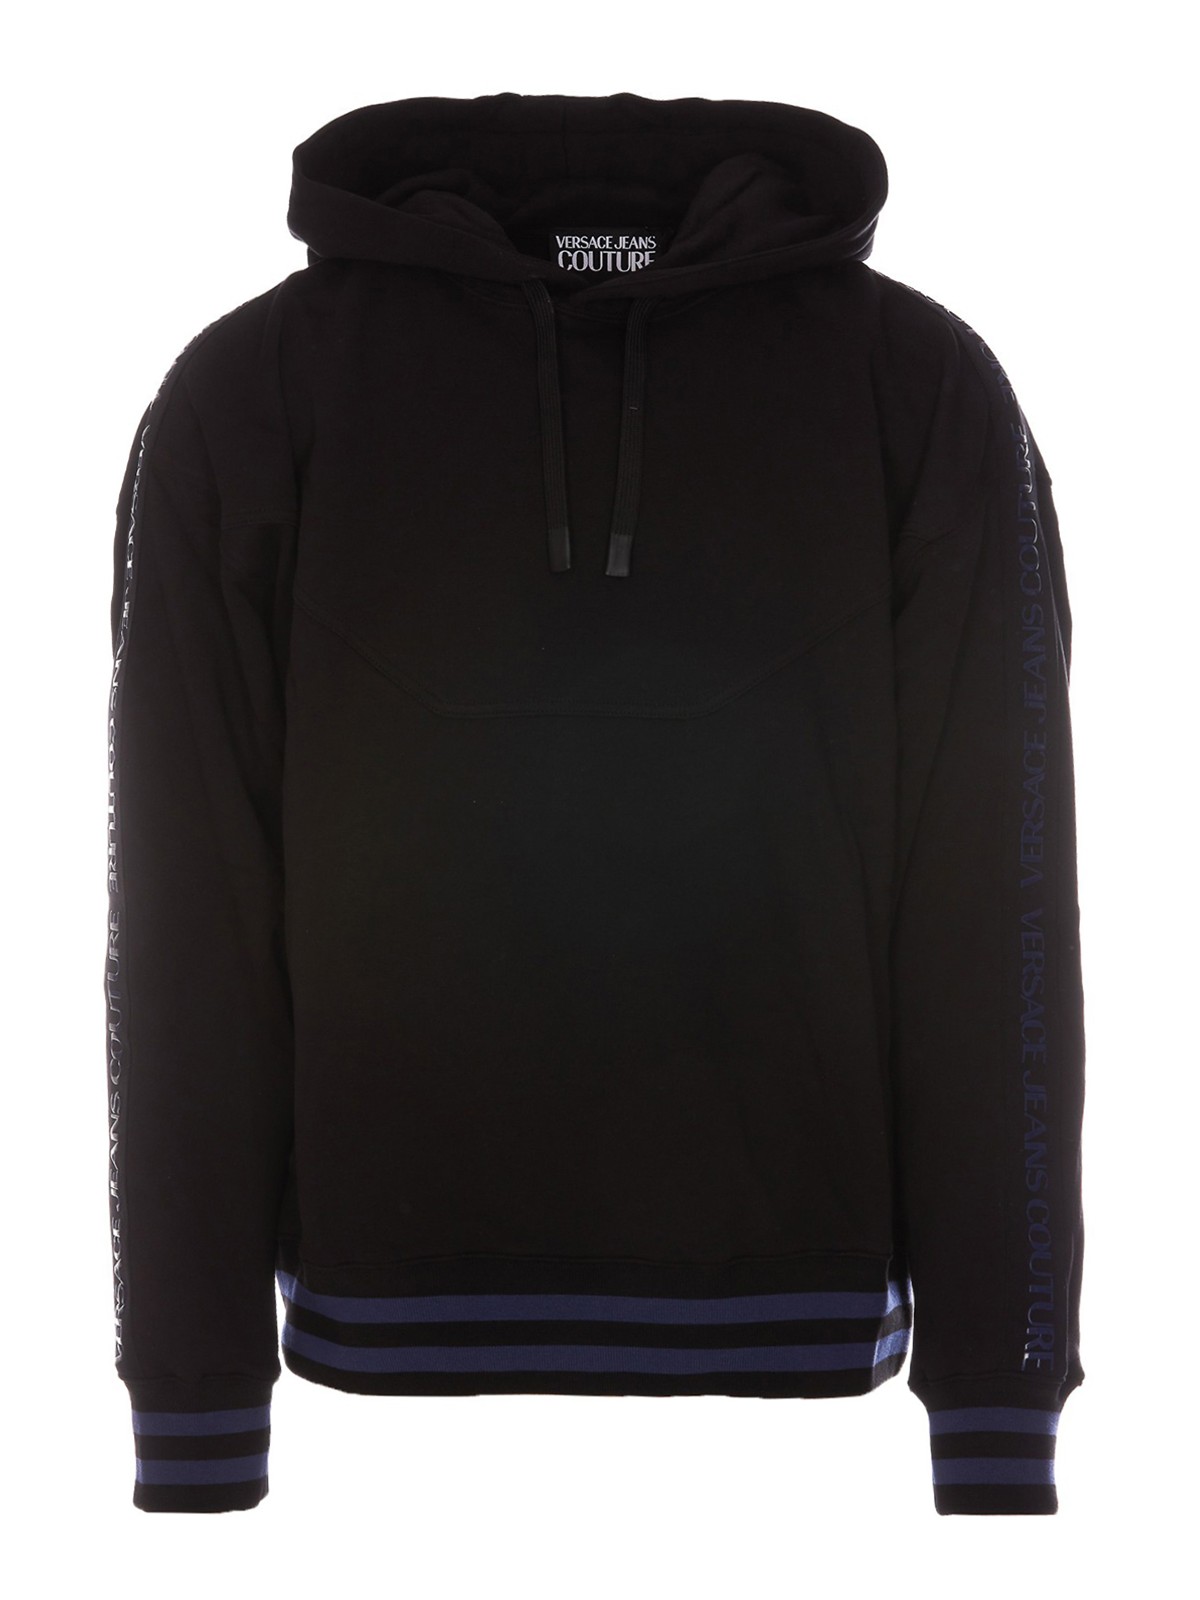 VERSACE JEANS COUTURE SUDADERA - NEGRO